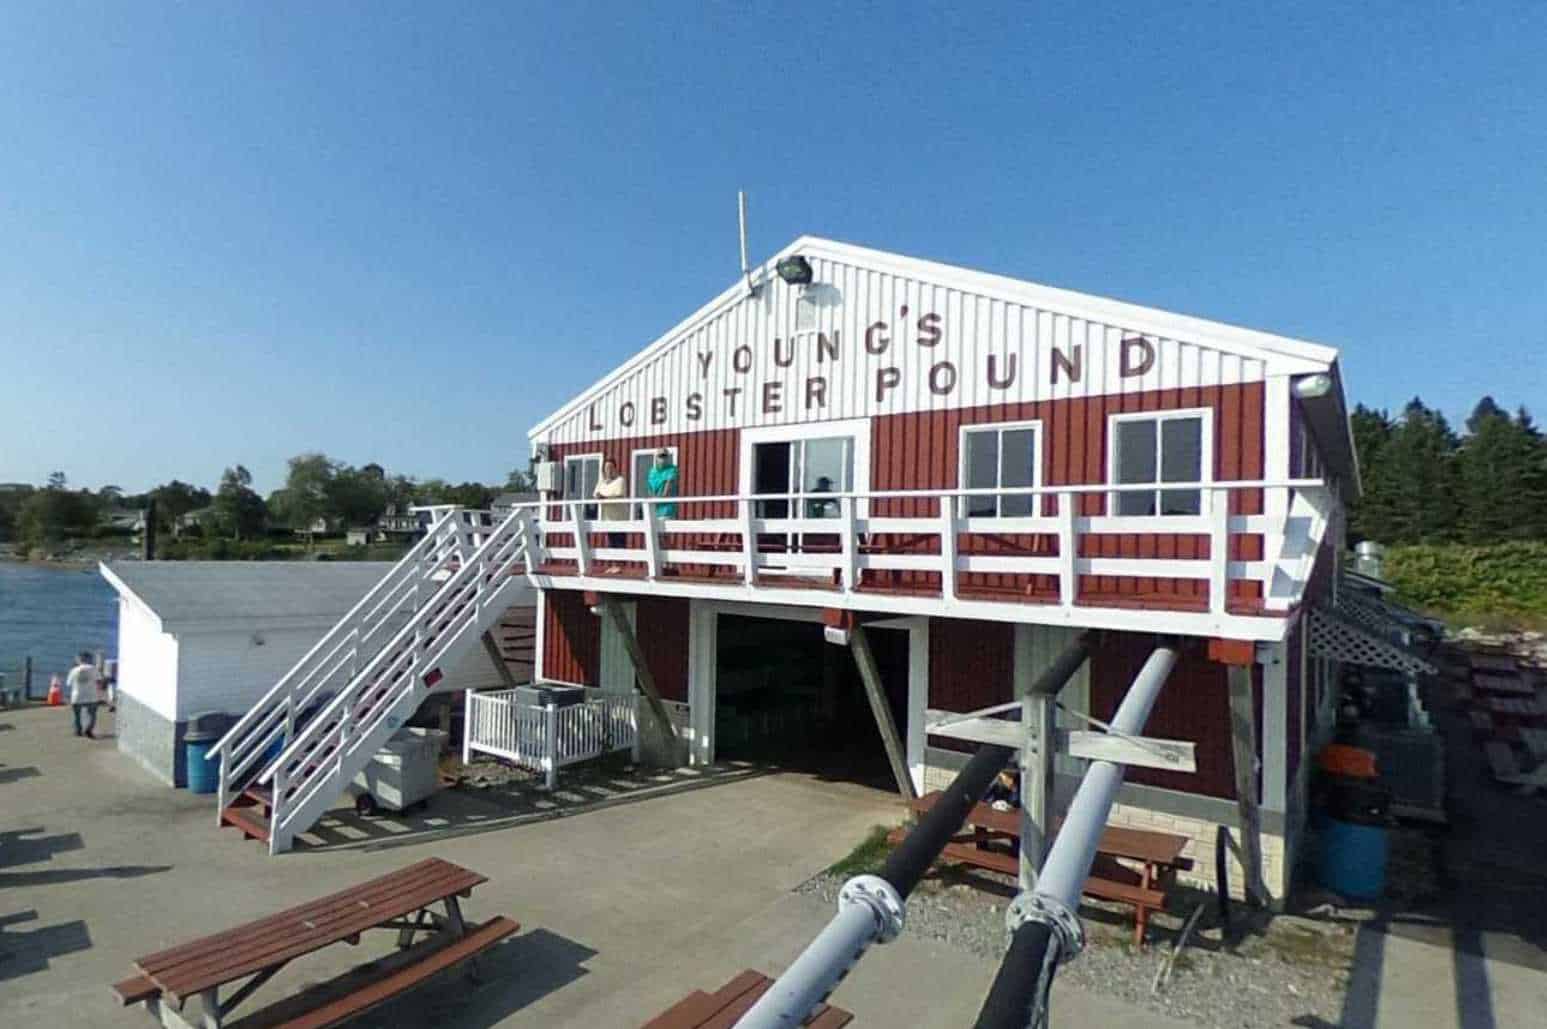 Young’s Lobster Pound Restaurant